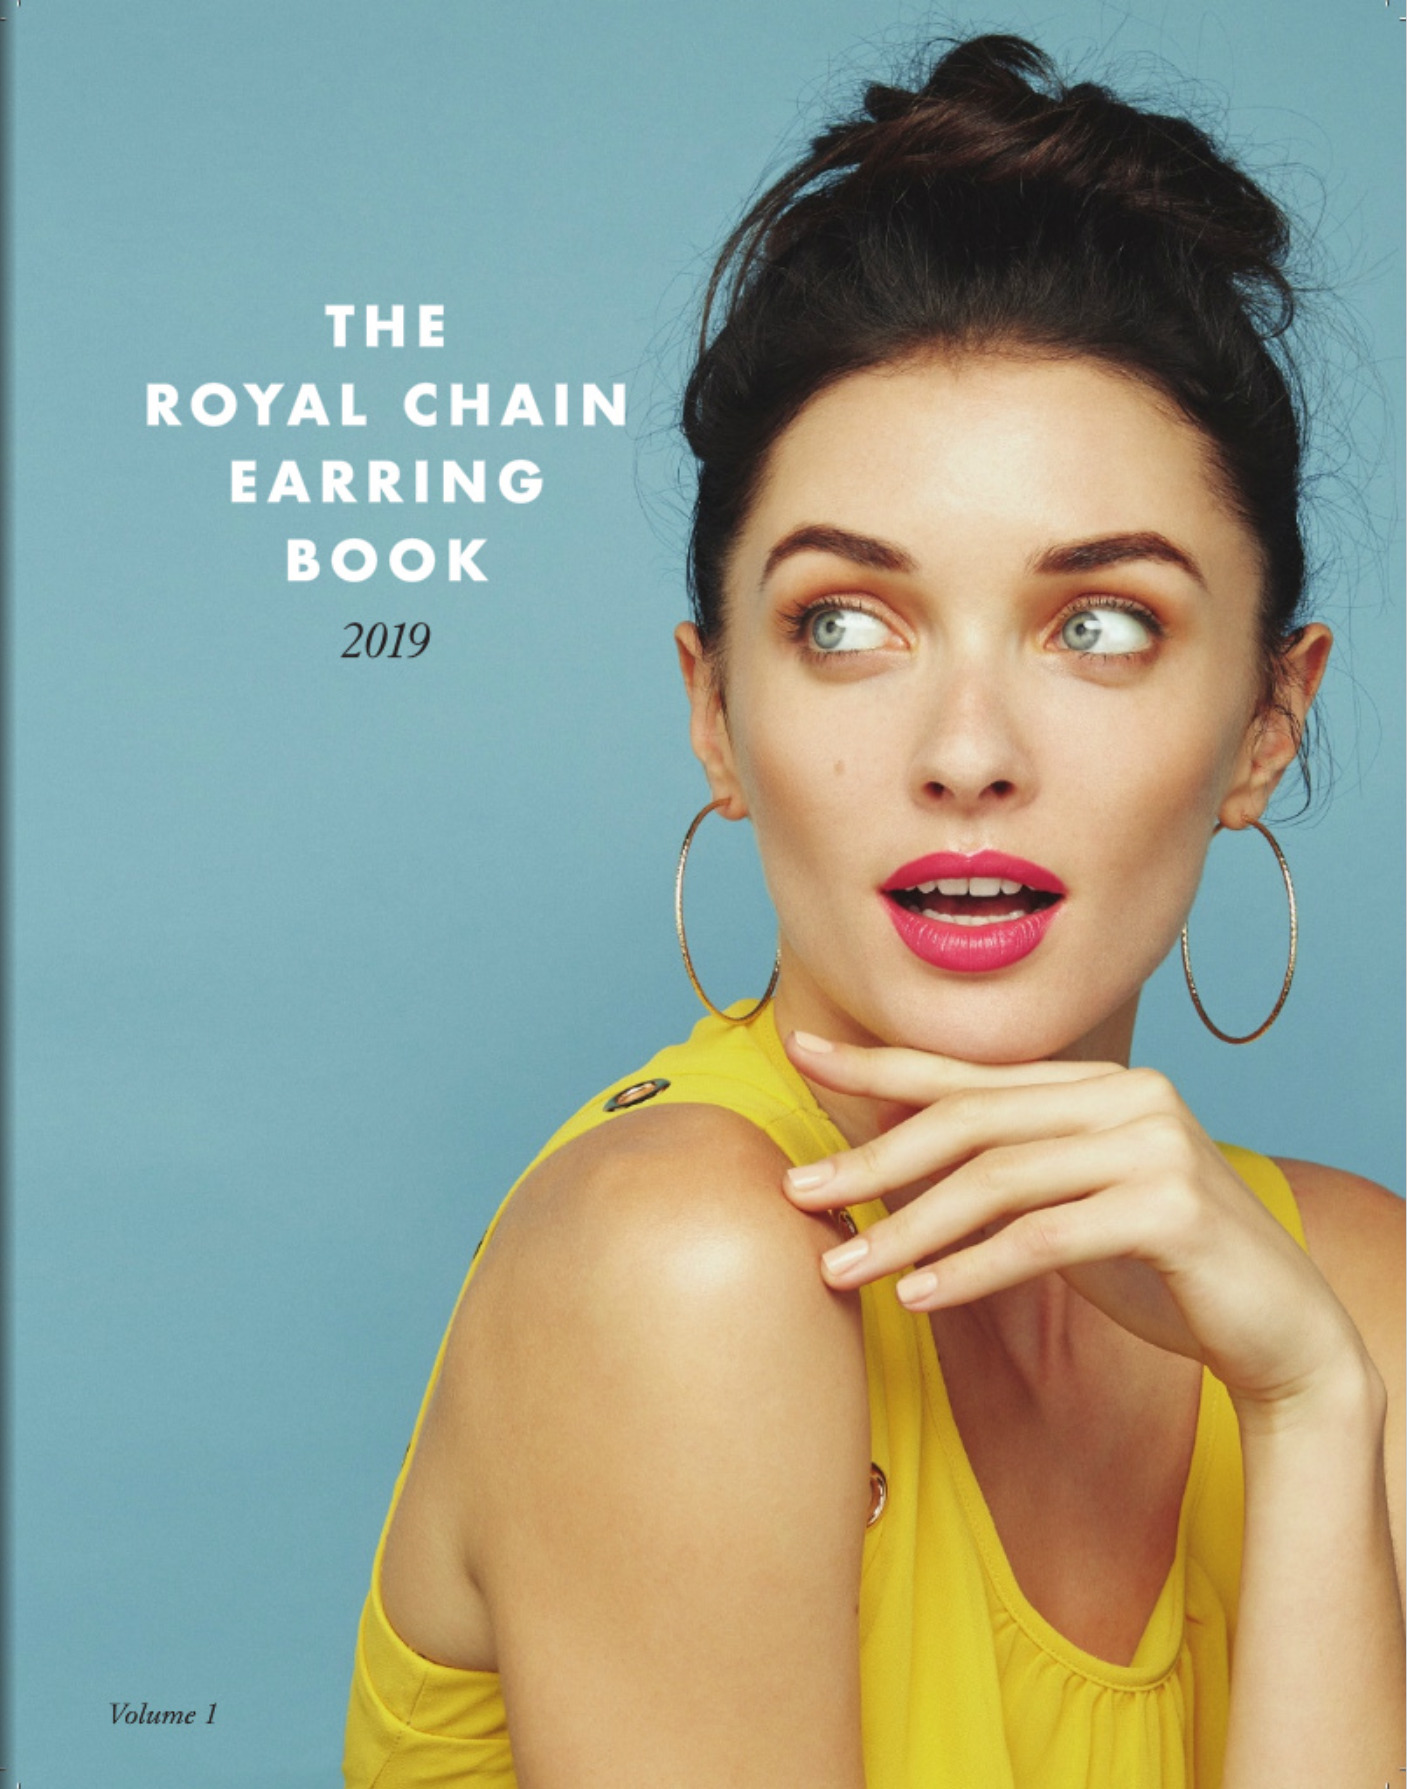 The Royal Chain Earring Book